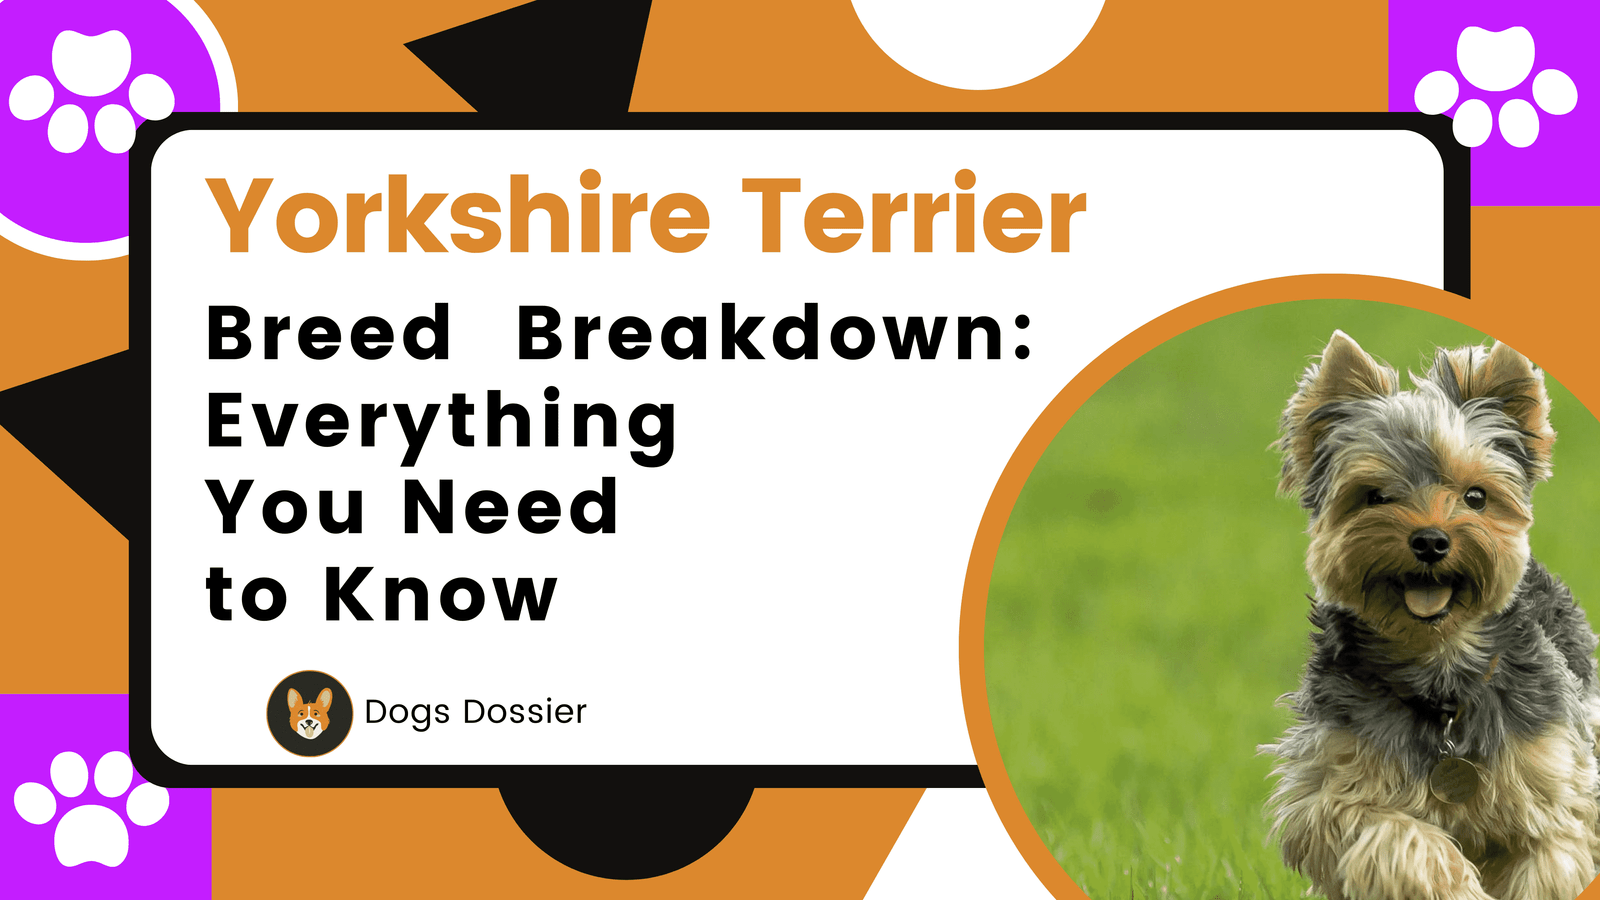 Yorkshire Terrier Breed Breakdown: Everything You Need to Know